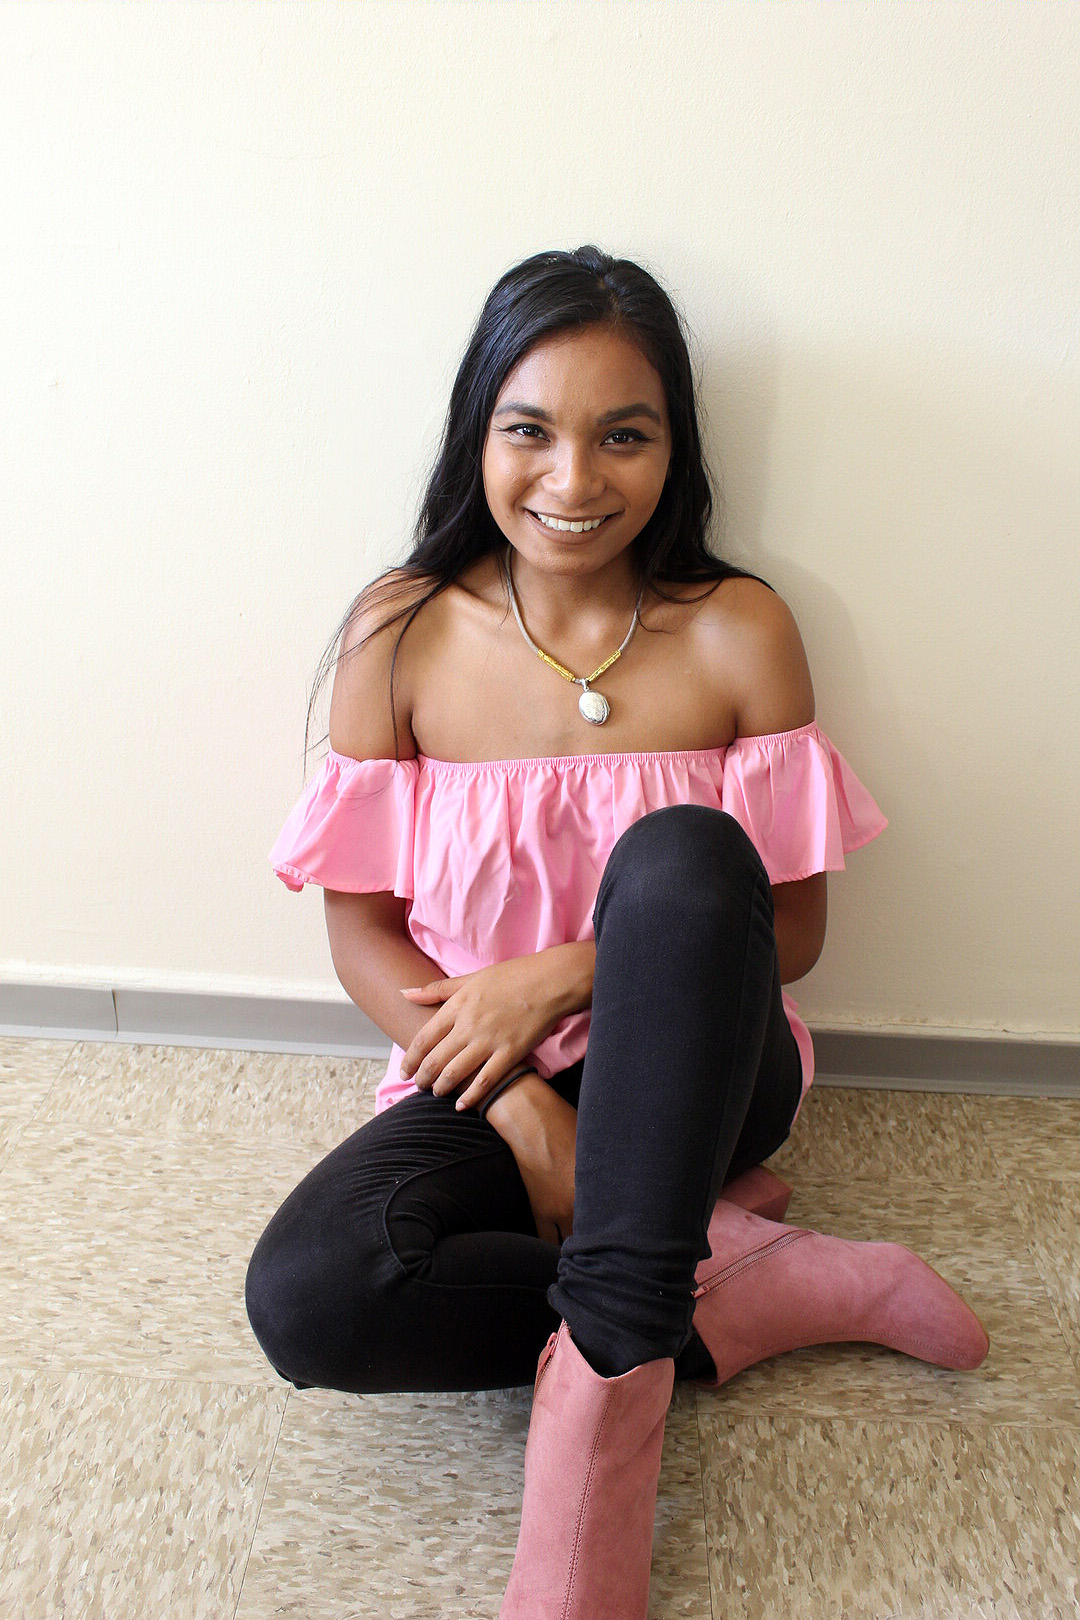 Pink-Off-The-Shoulder-Top-Fall-Style-Blogger-Fashionista-LINDATENCHITRAN-1-1616x1080